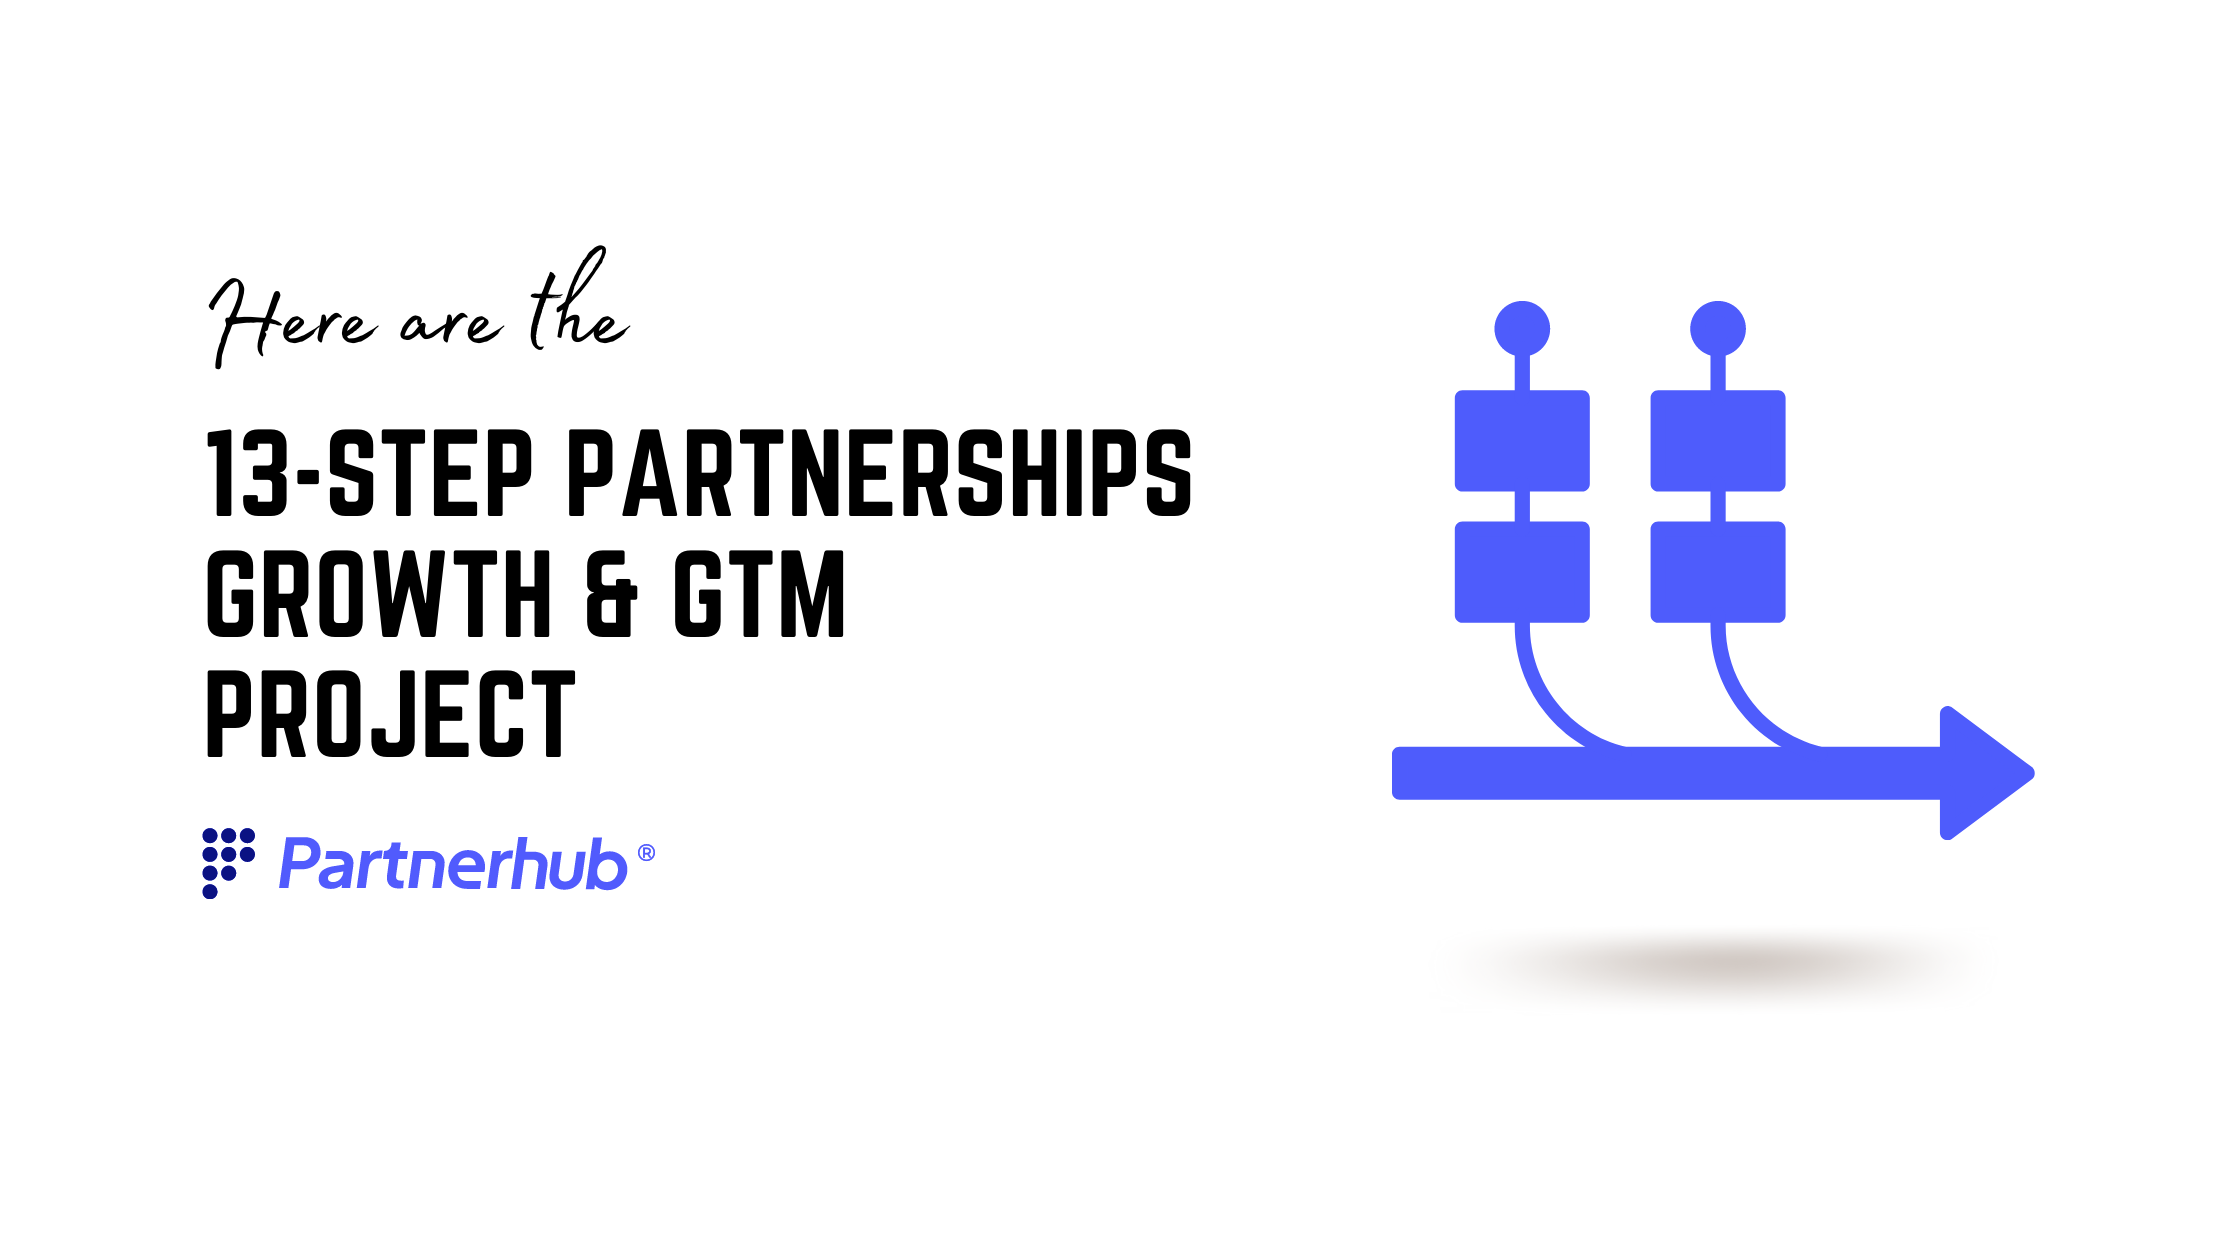 13-Step Partnerships Growth & GTM project